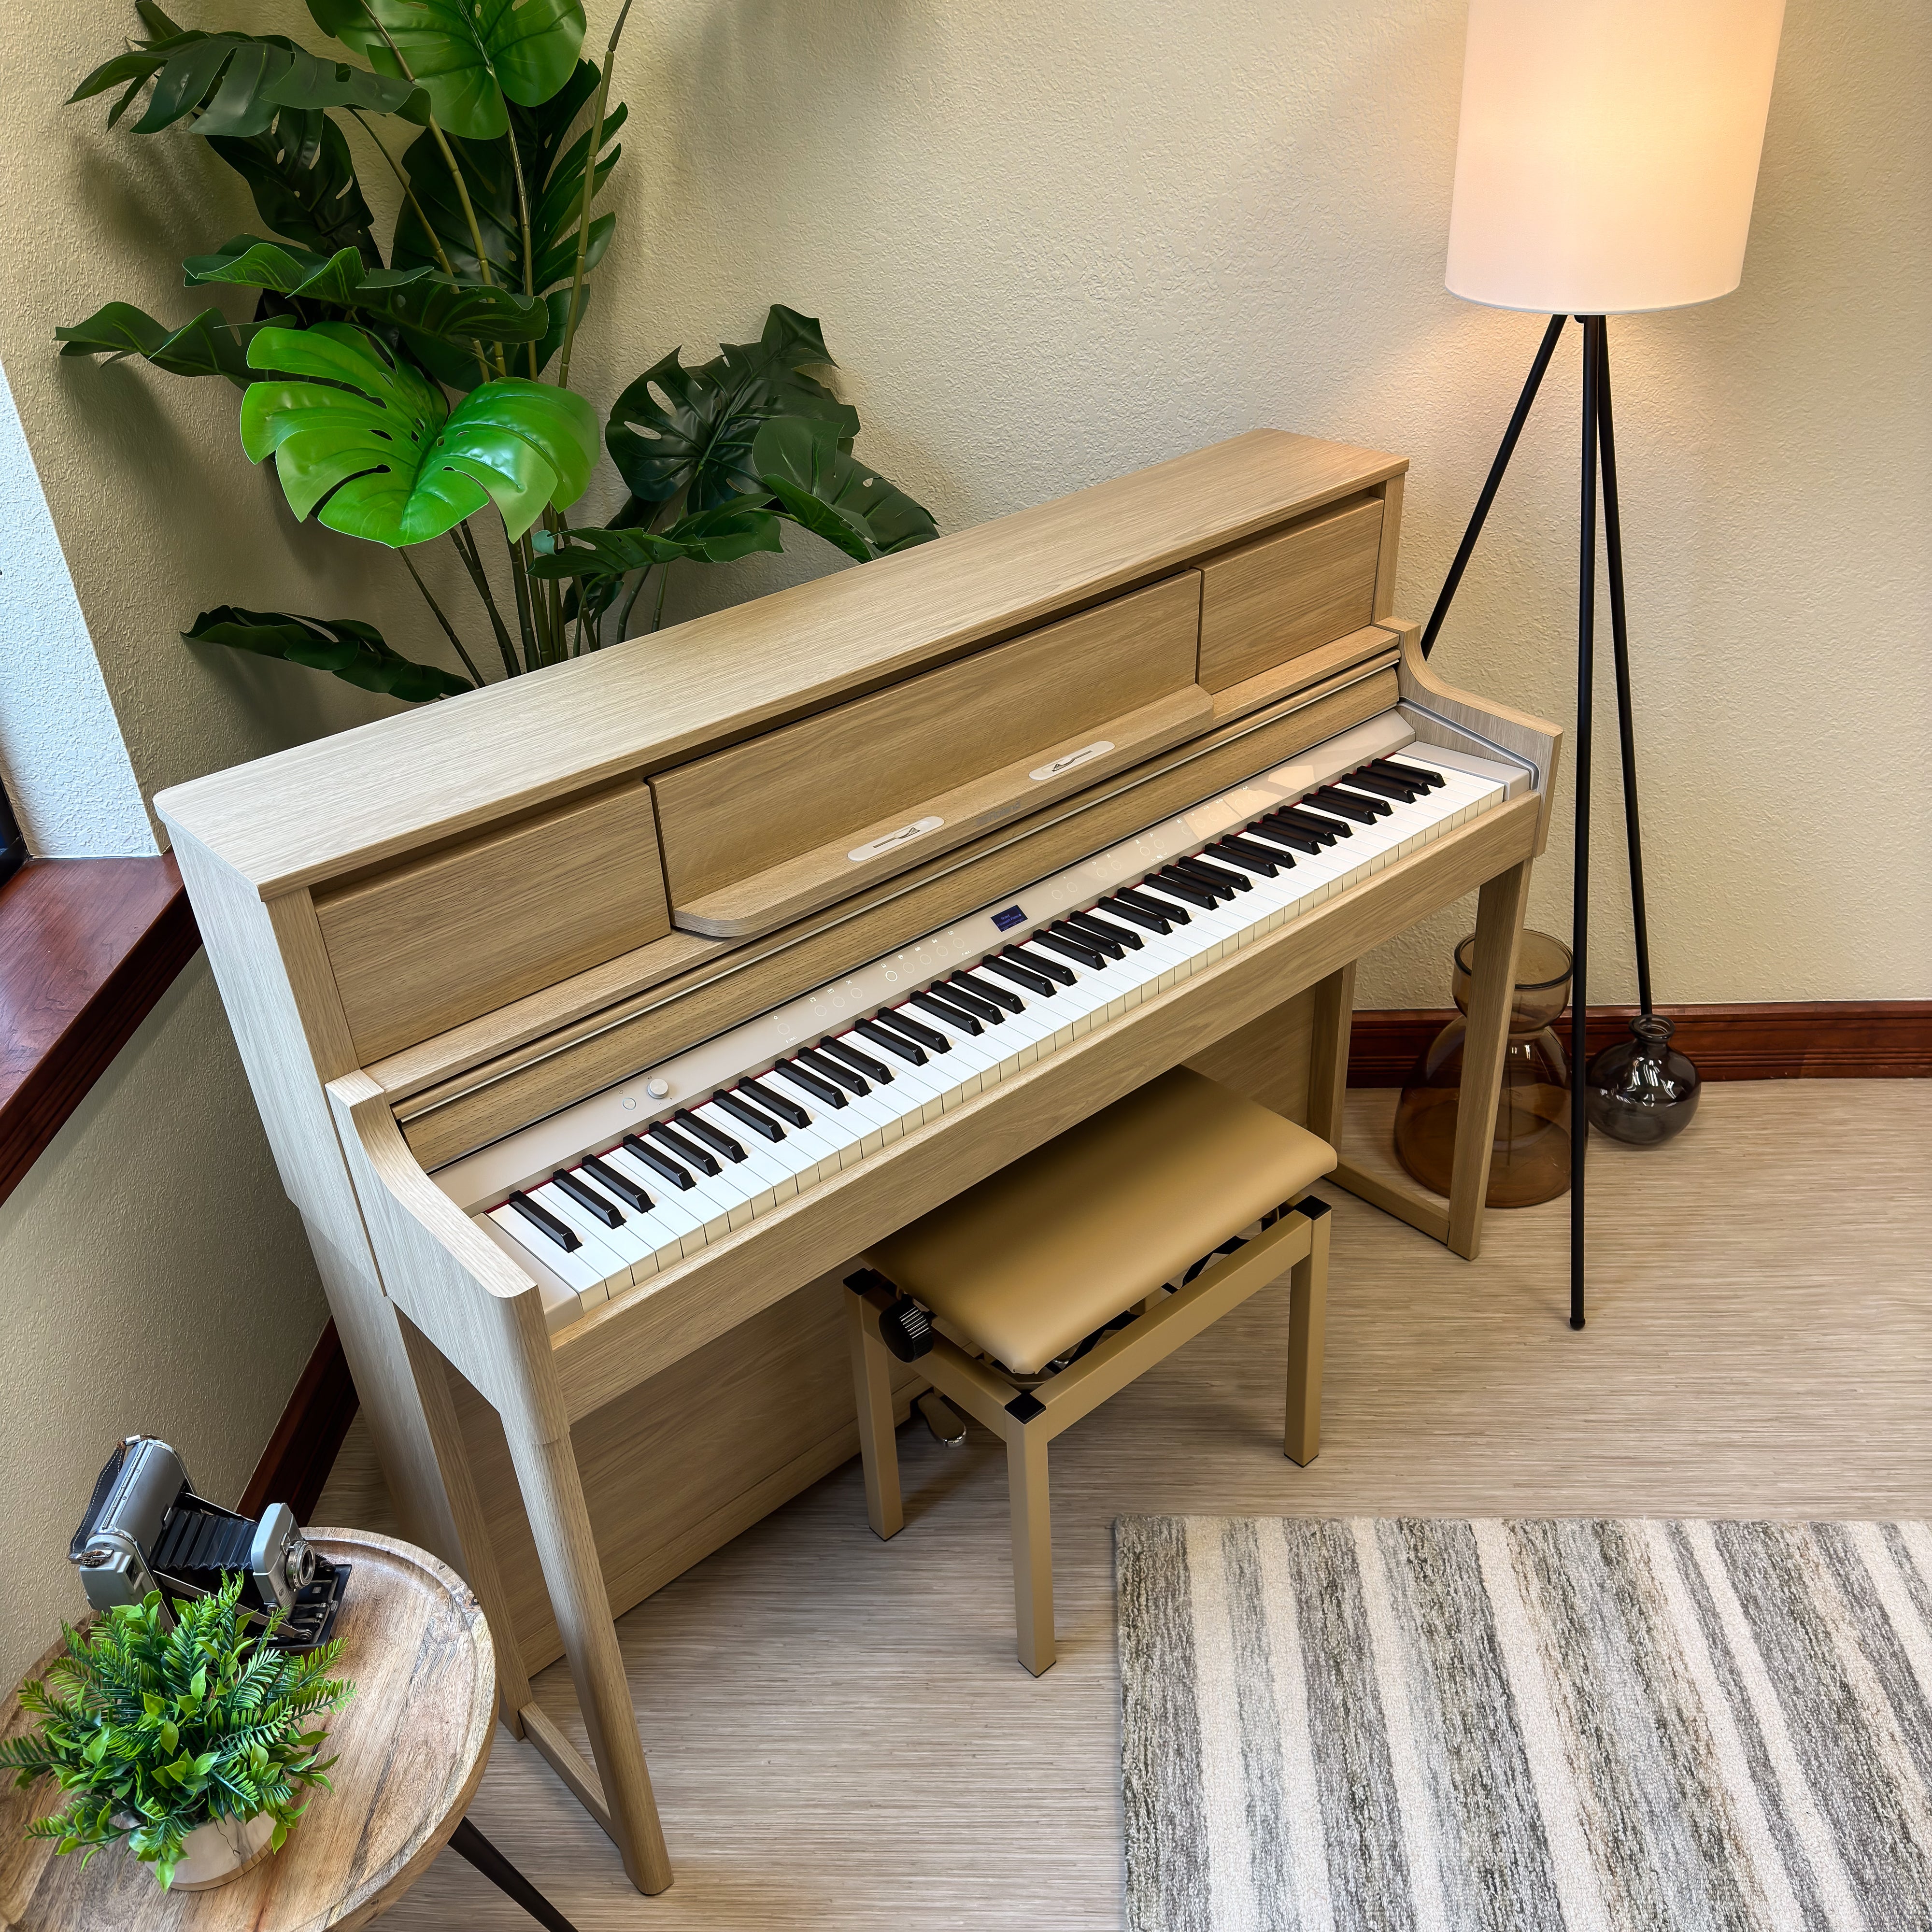 Roland LX-5 Digital Piano with Bench - Light Oak - View 8